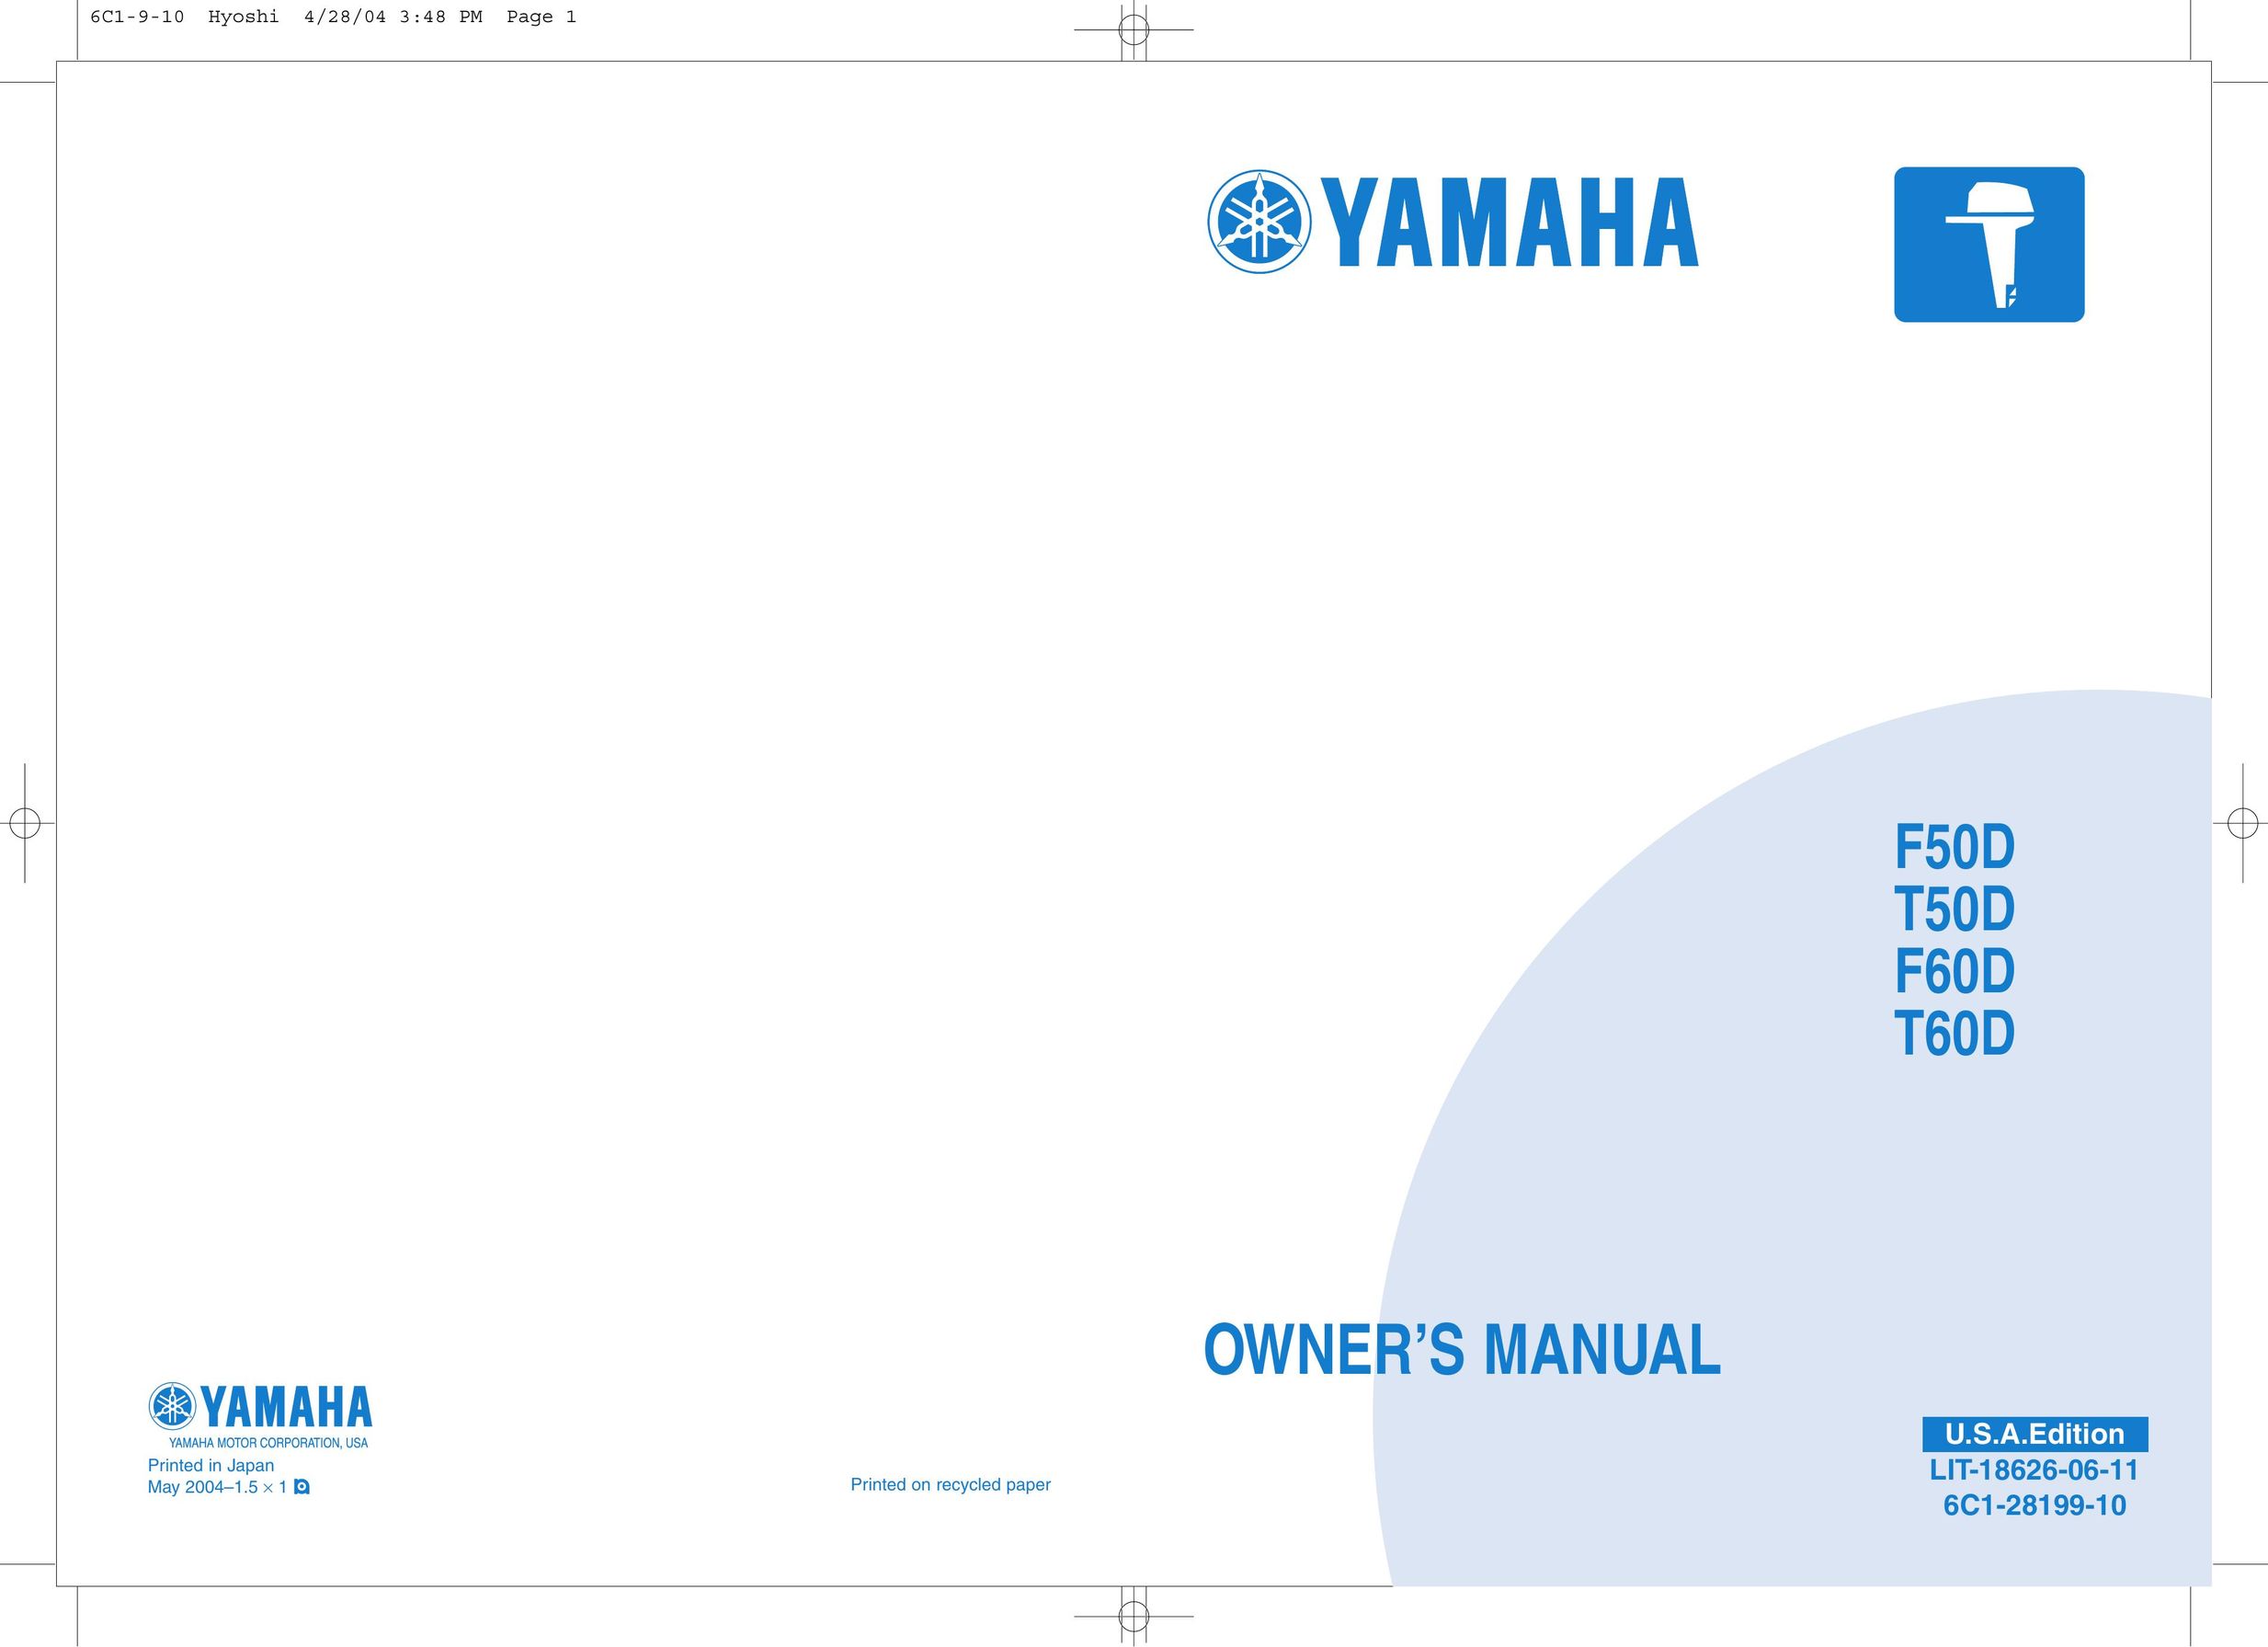 Yamaha T60D Network Router User Manual